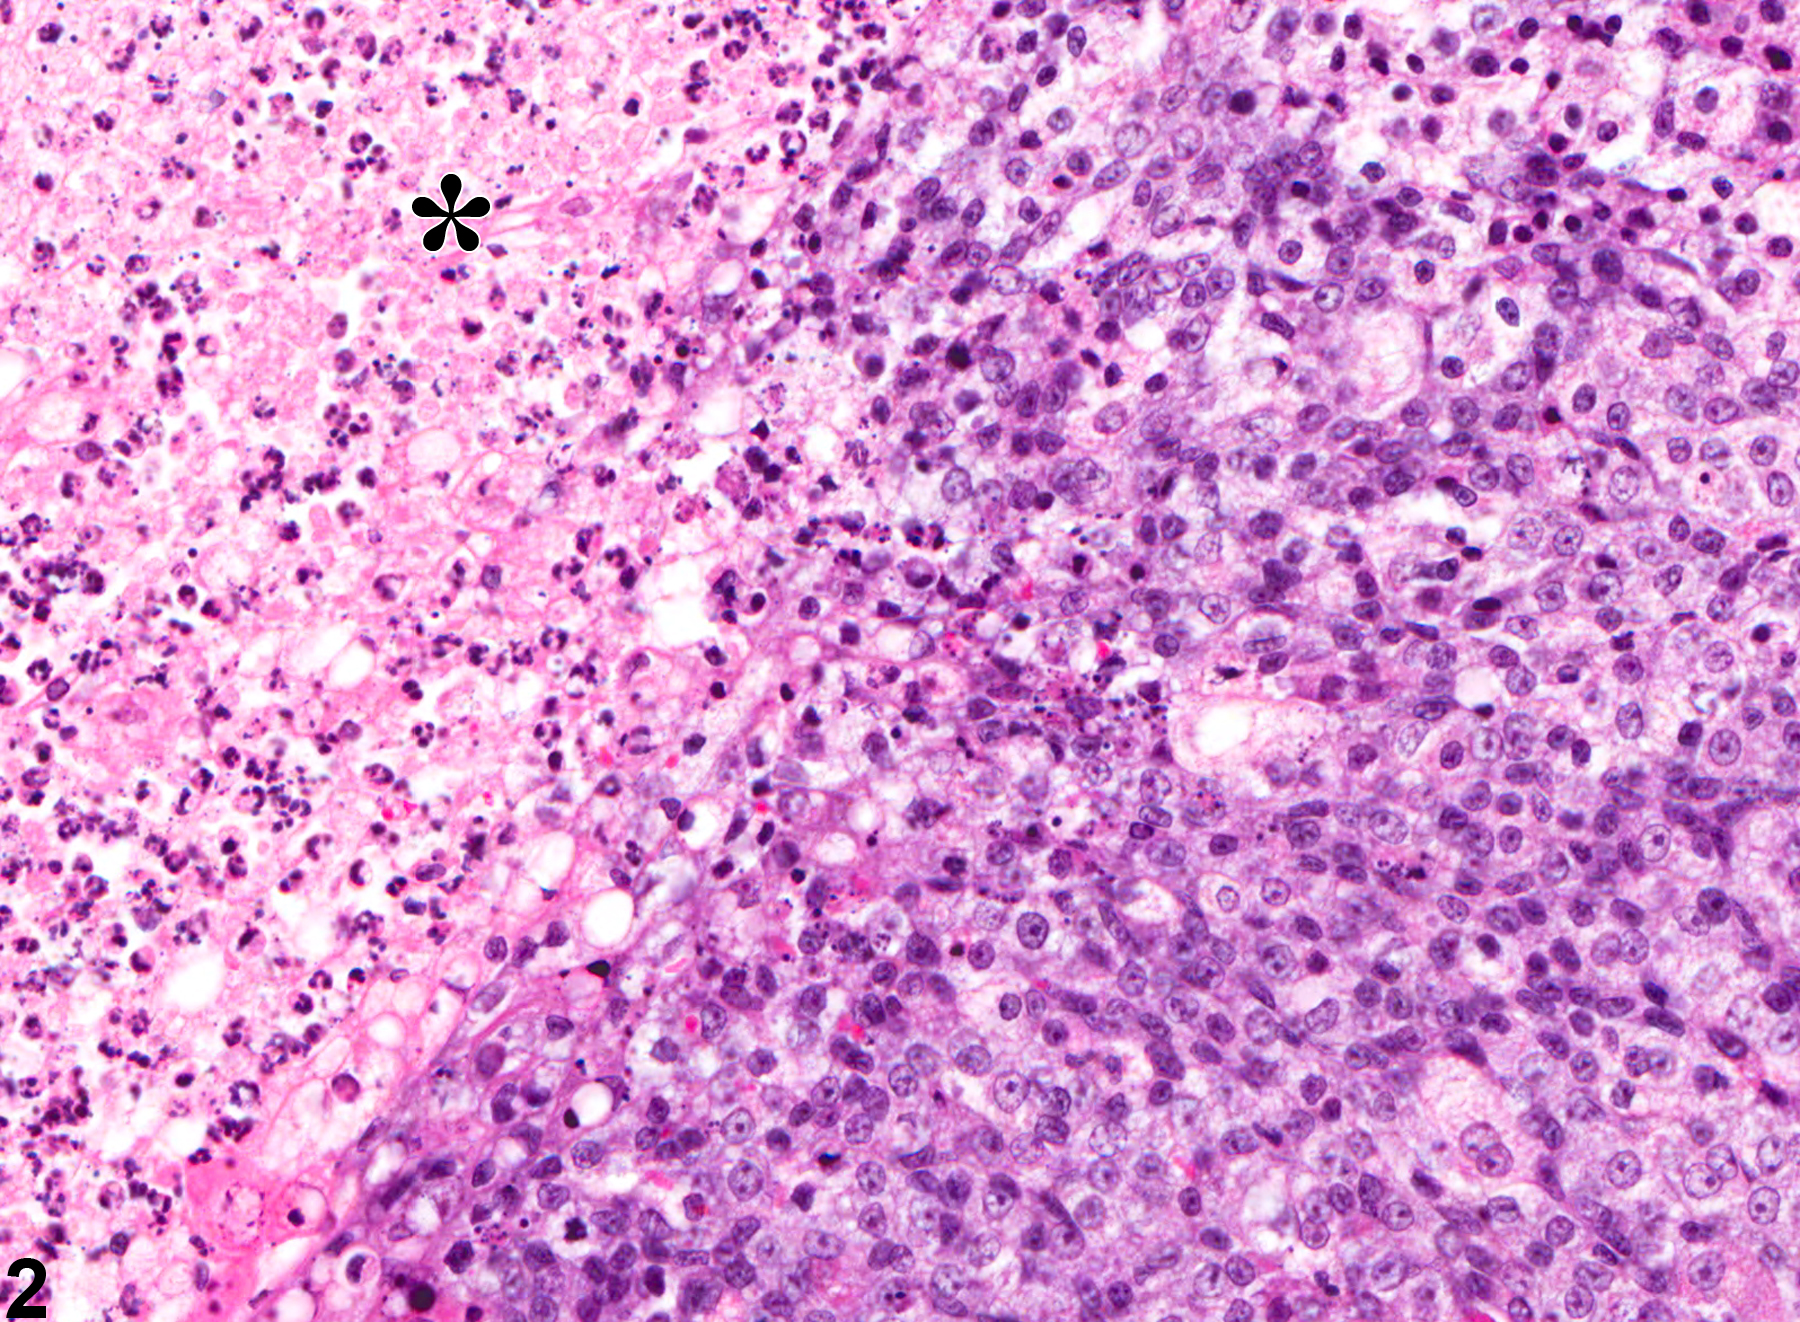 Image of necrosis in the preputial gland from a male F344/N rat in a chronic study